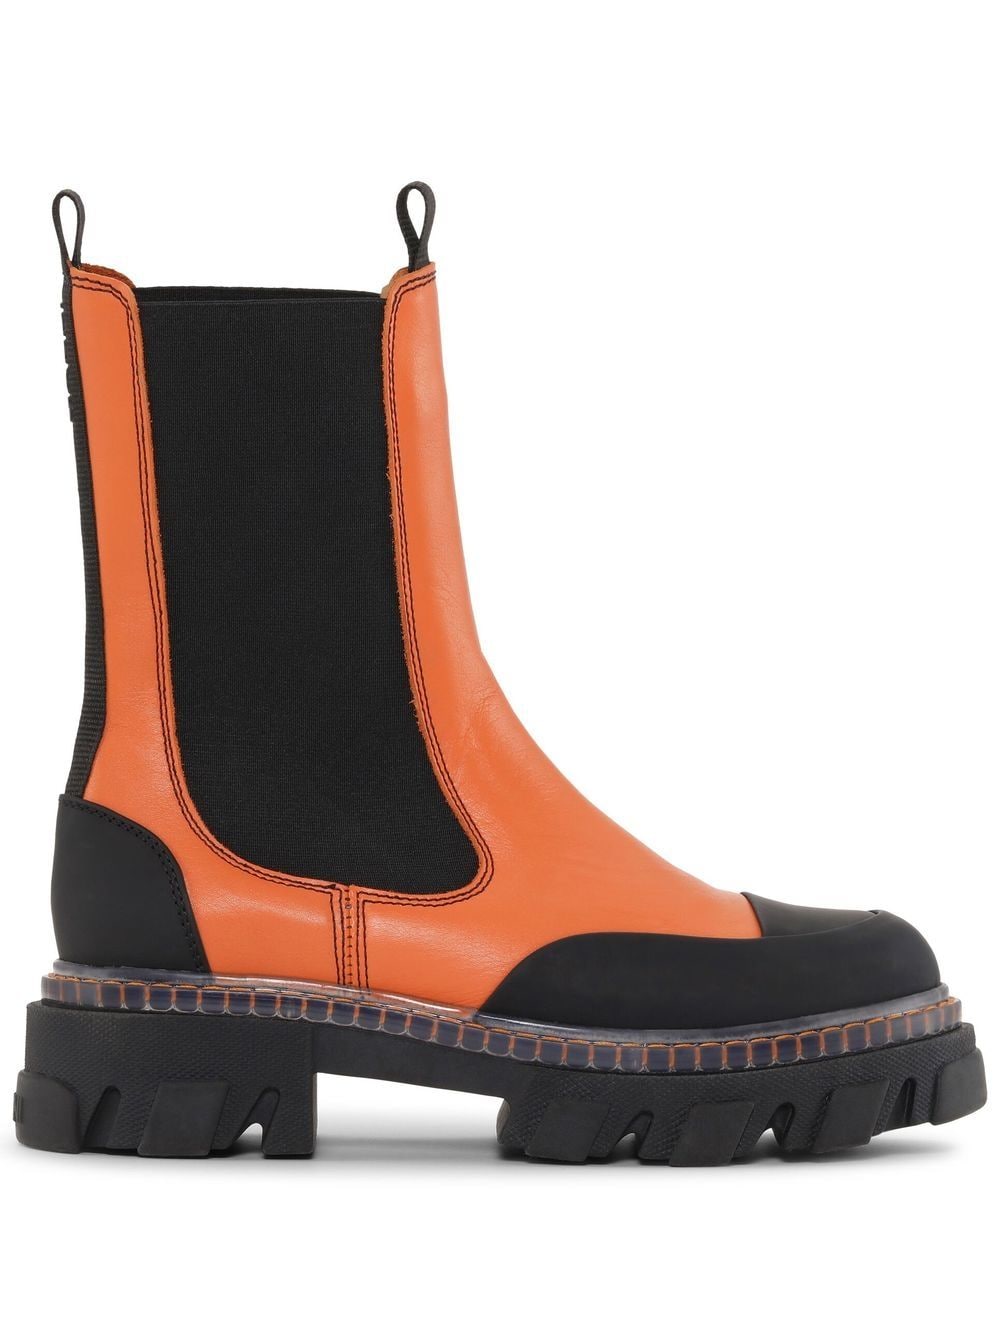 GANNI CLEATED MID CHELSEA BOOTS